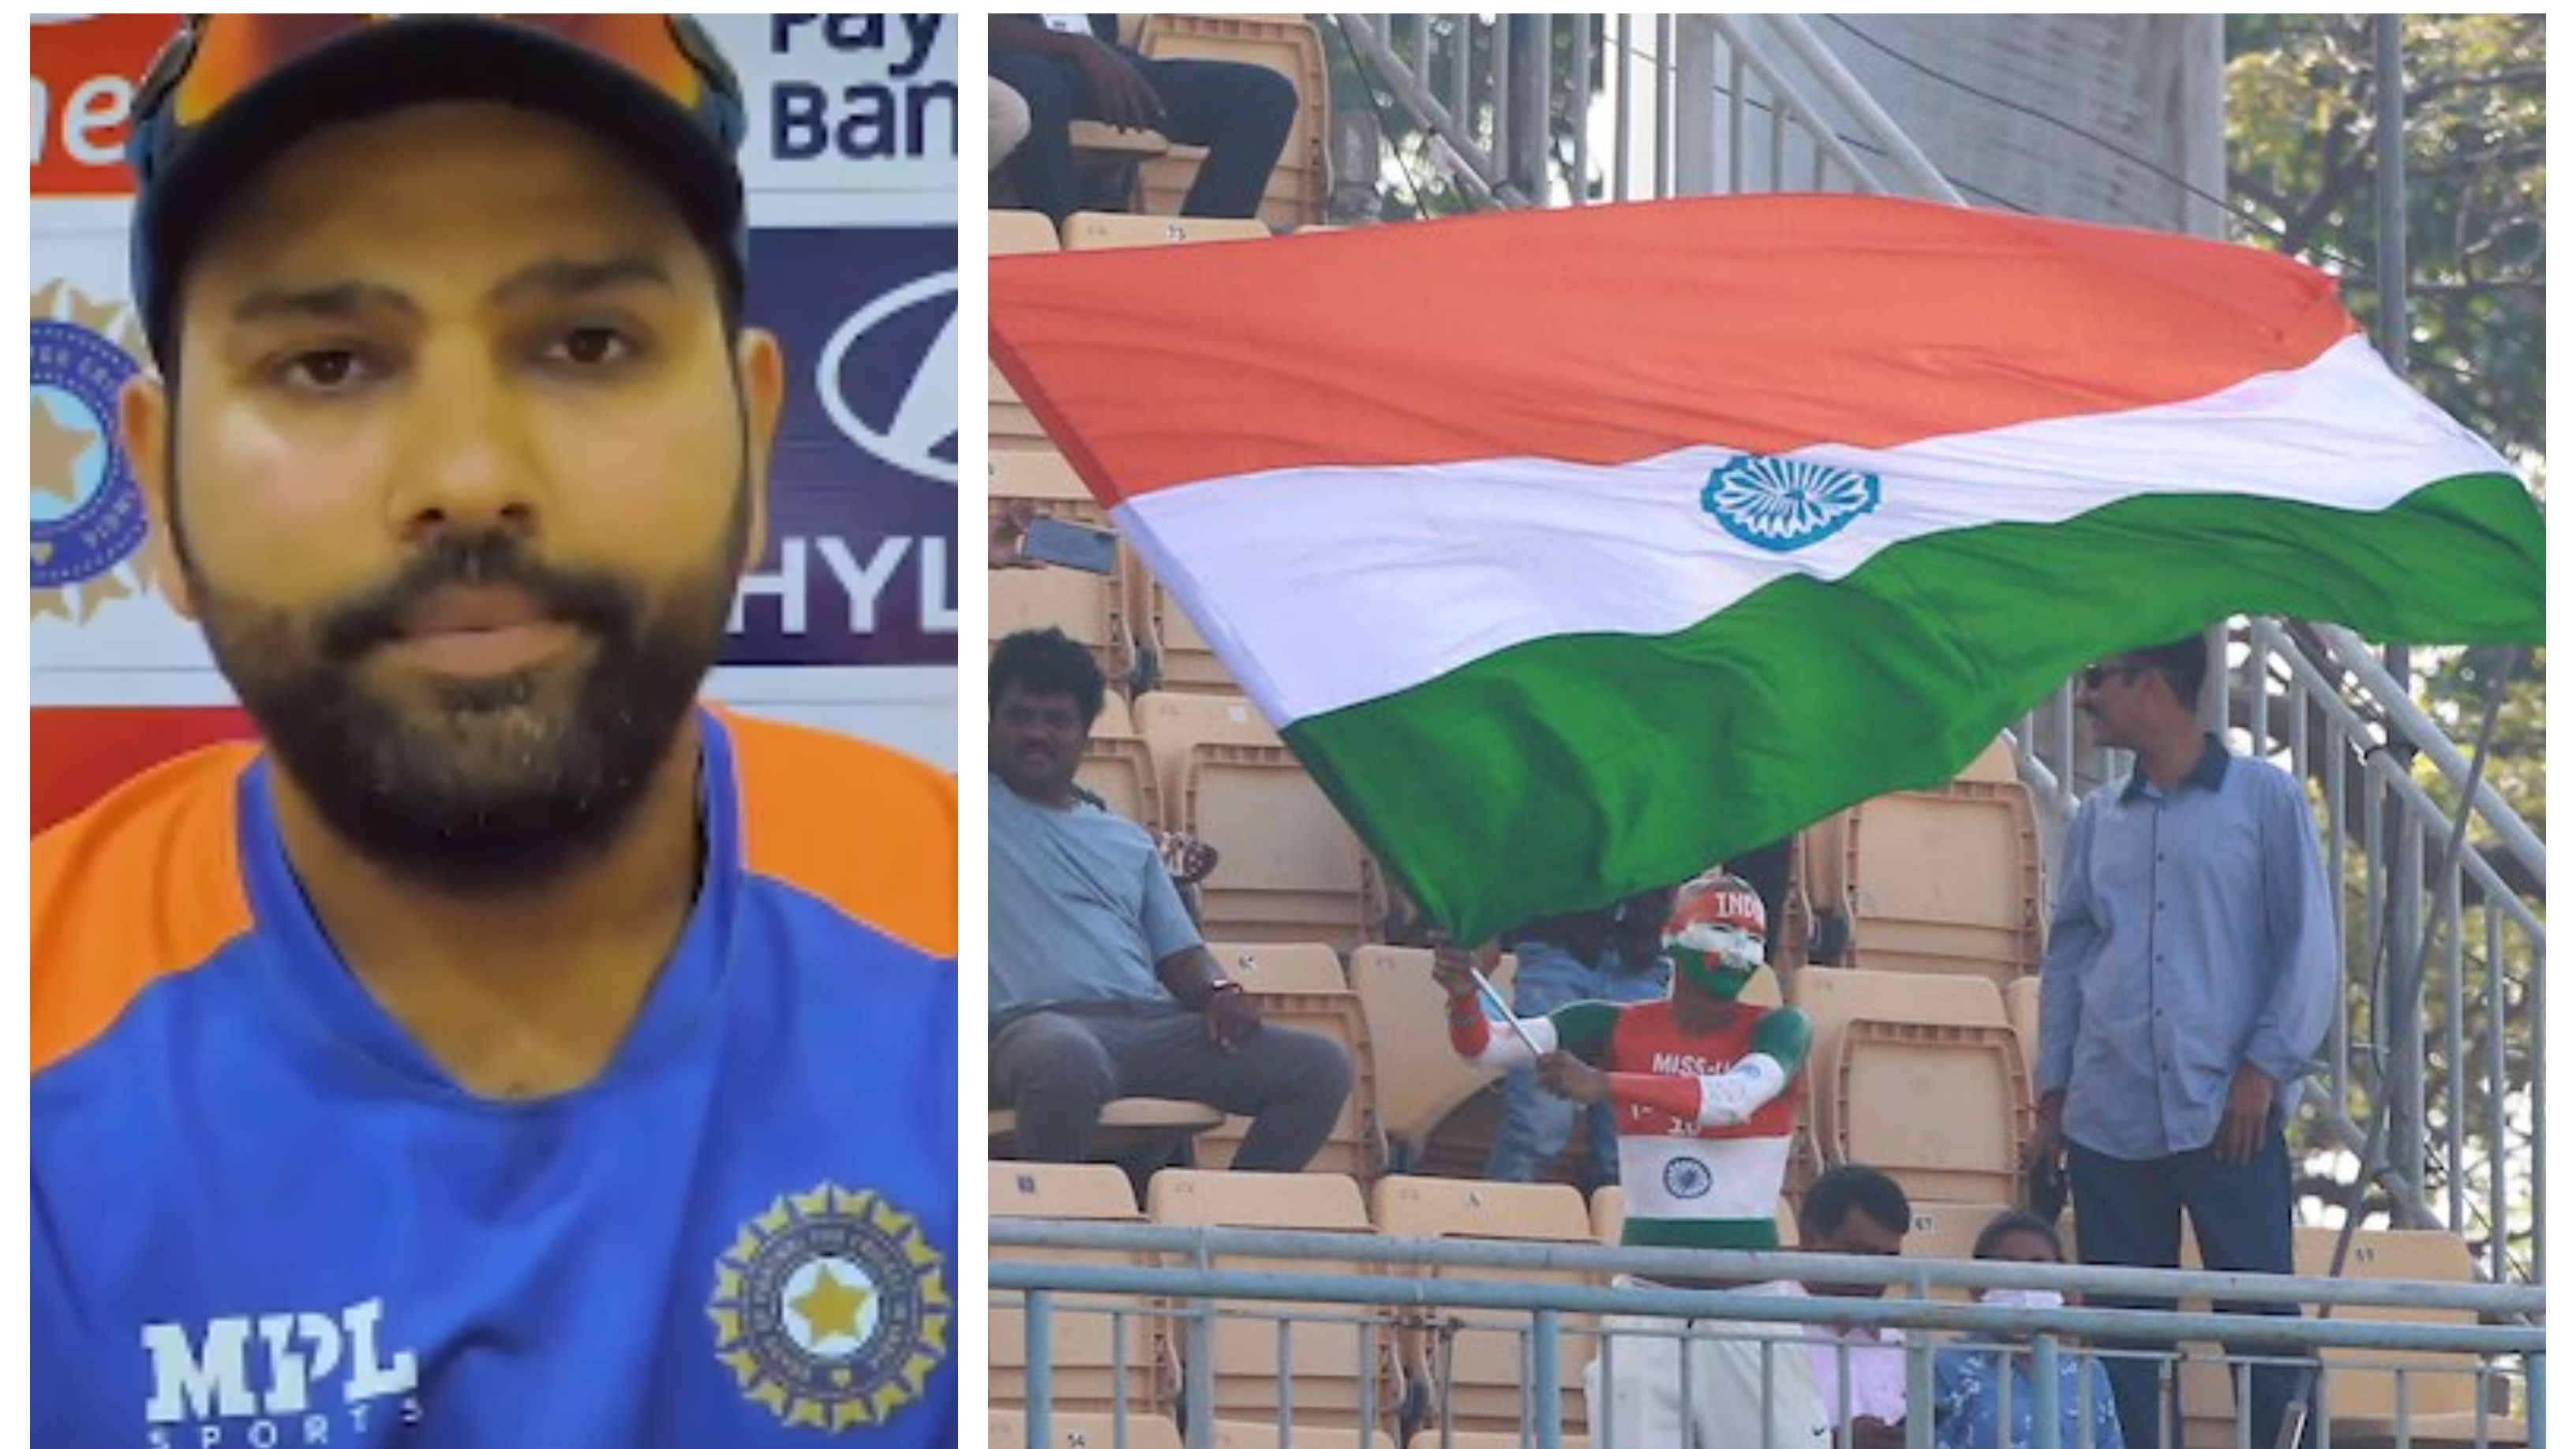 IND v ENG 2021: ‘It was great fun to have them’, Rohit Sharma welcomes spectators at the ground